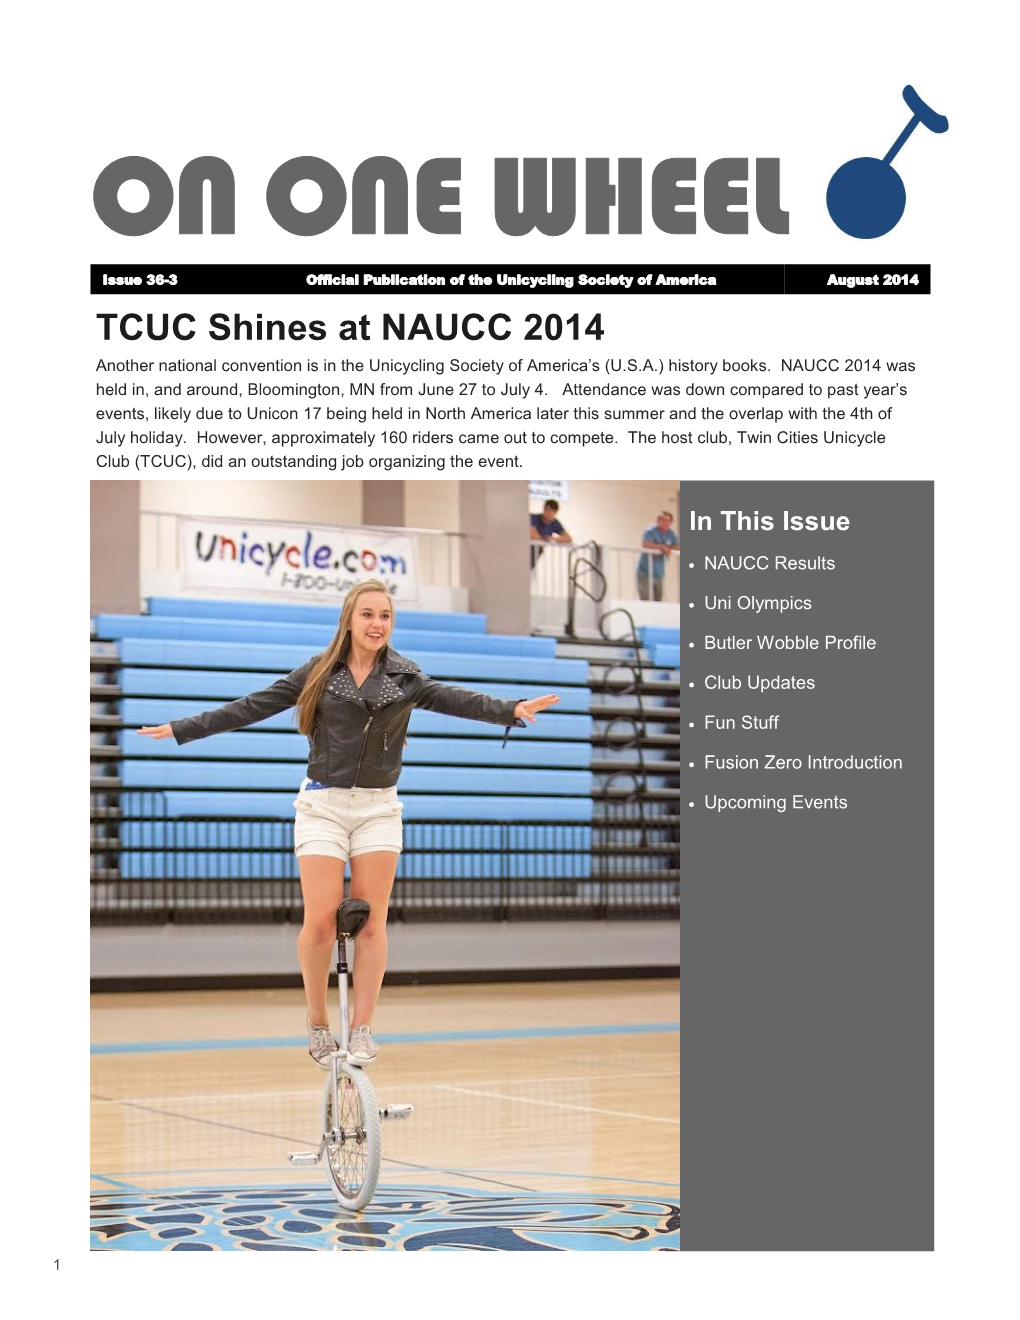 TCUC Shines at NAUCC 2014 Another National Convention Is in the Unicycling Society of America’S (U.S.A.) History Books